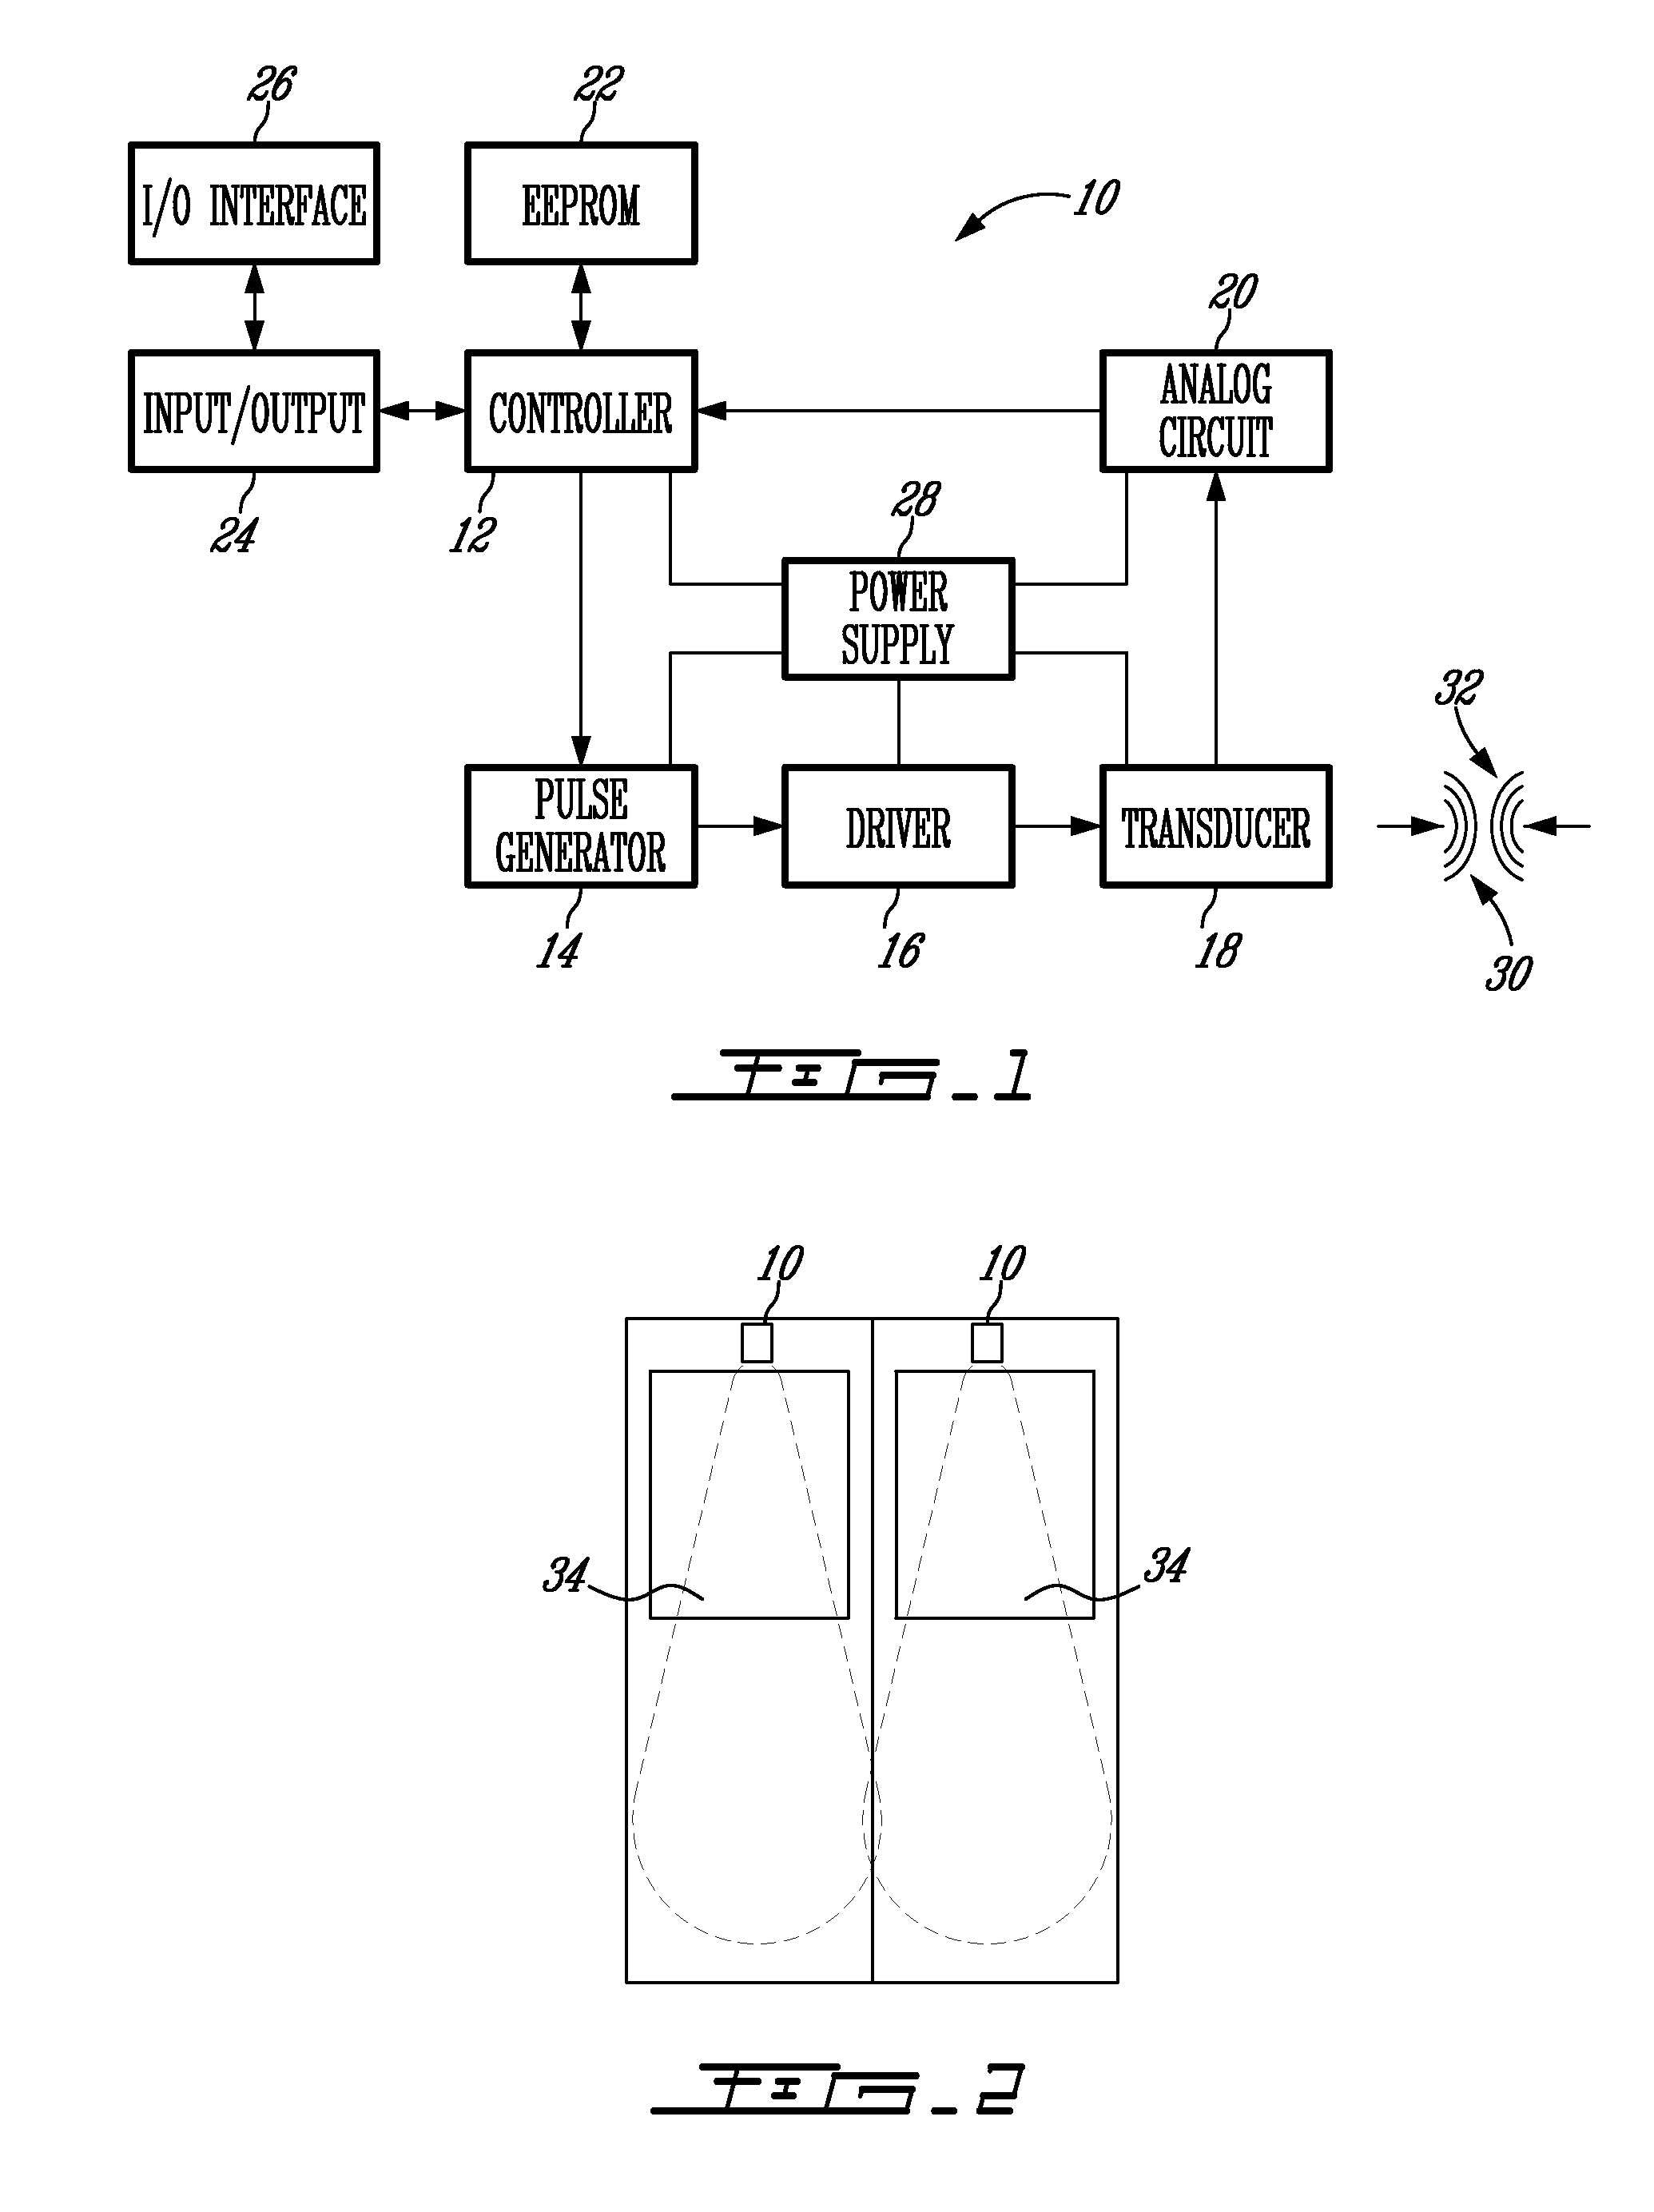 Device and Method for Adaptive Ultrasound Sensing